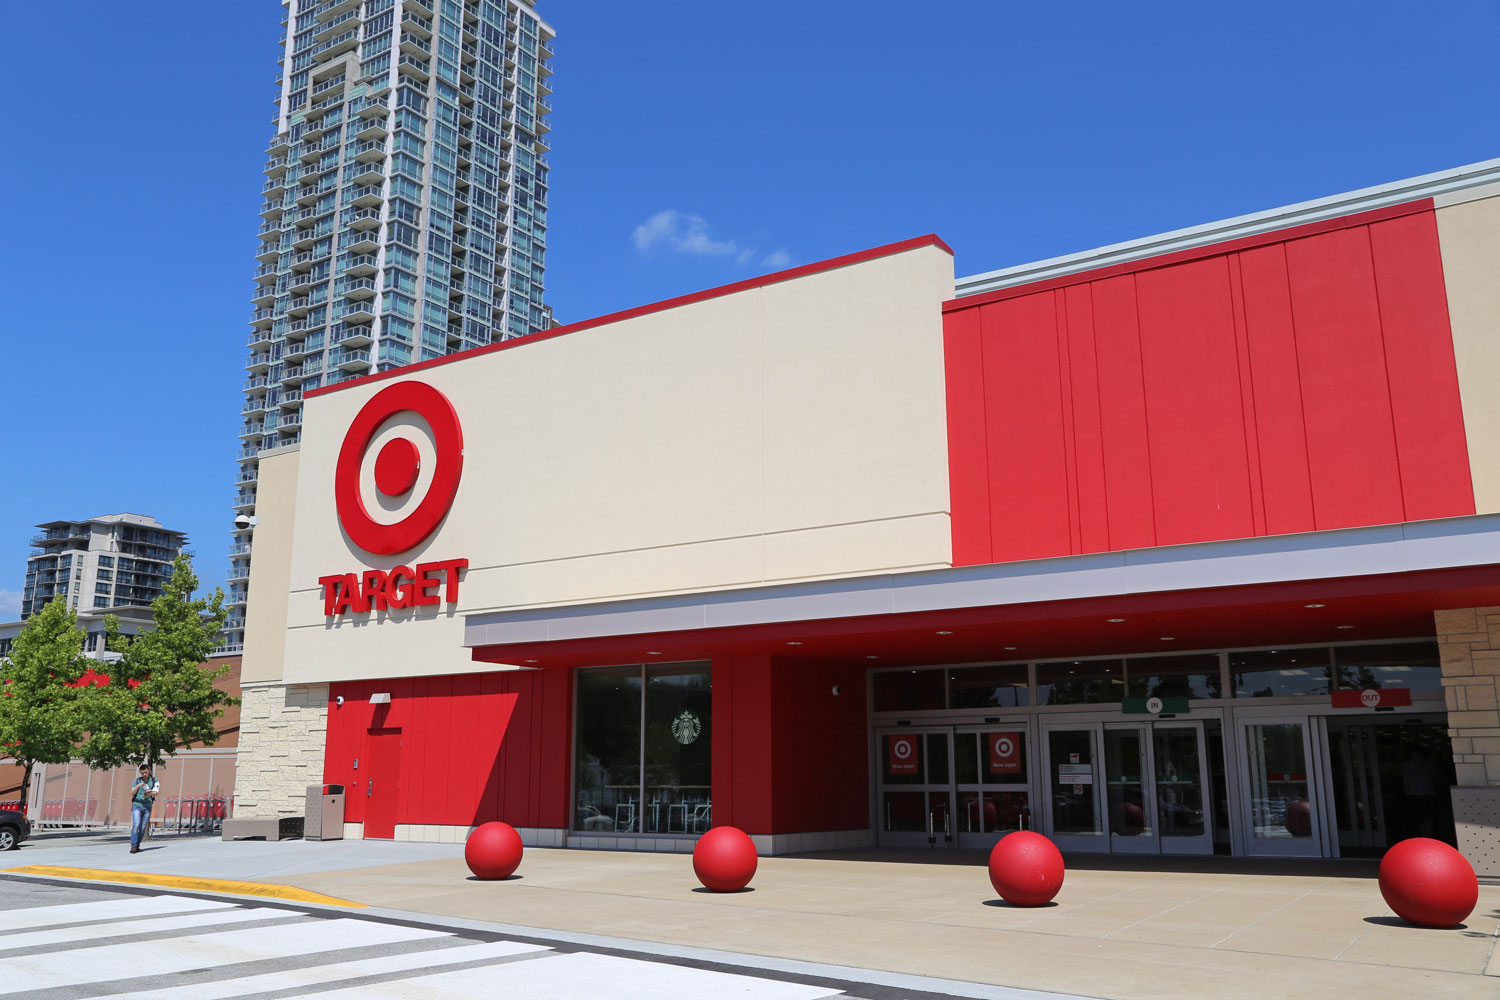 target pay mobile payment news shop building headquarters mall